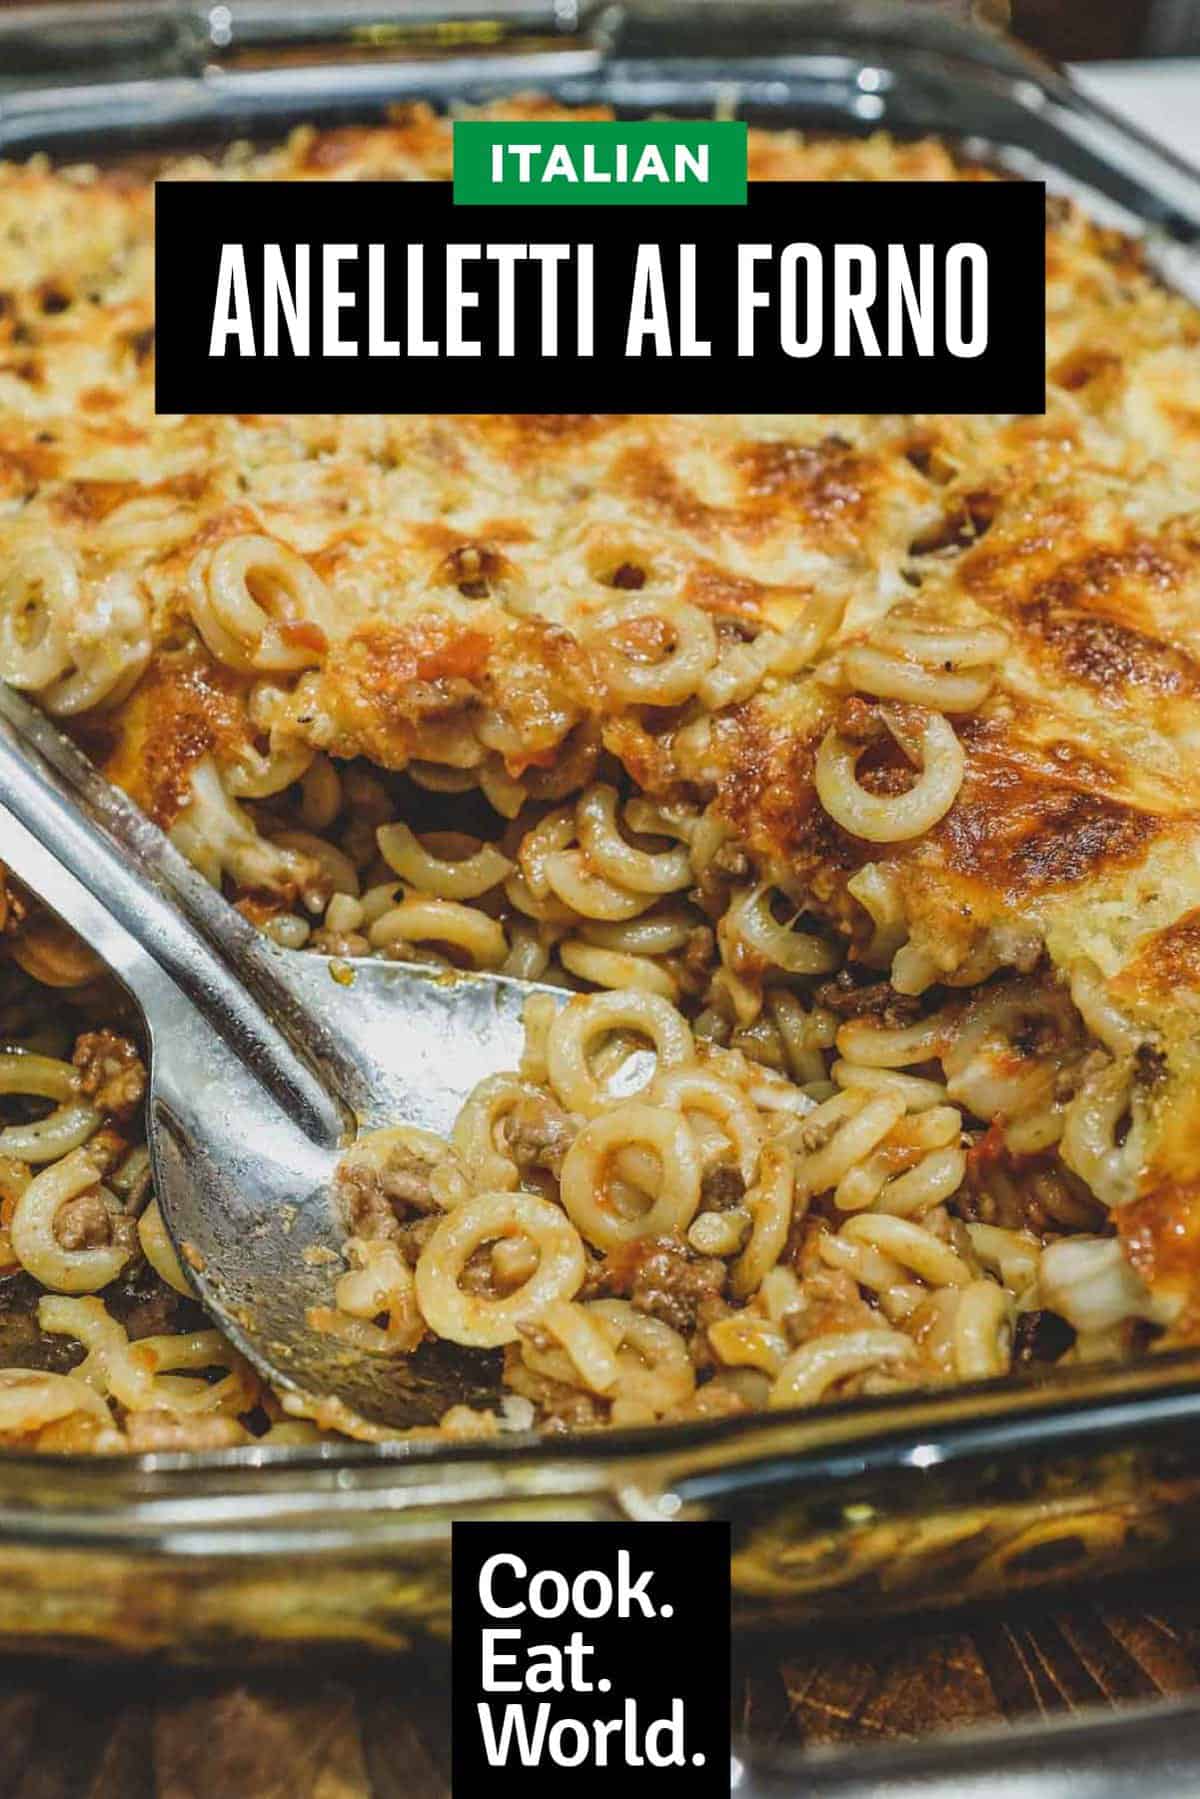 A baking dish of baked pasta rings called Anelleti Al Forno